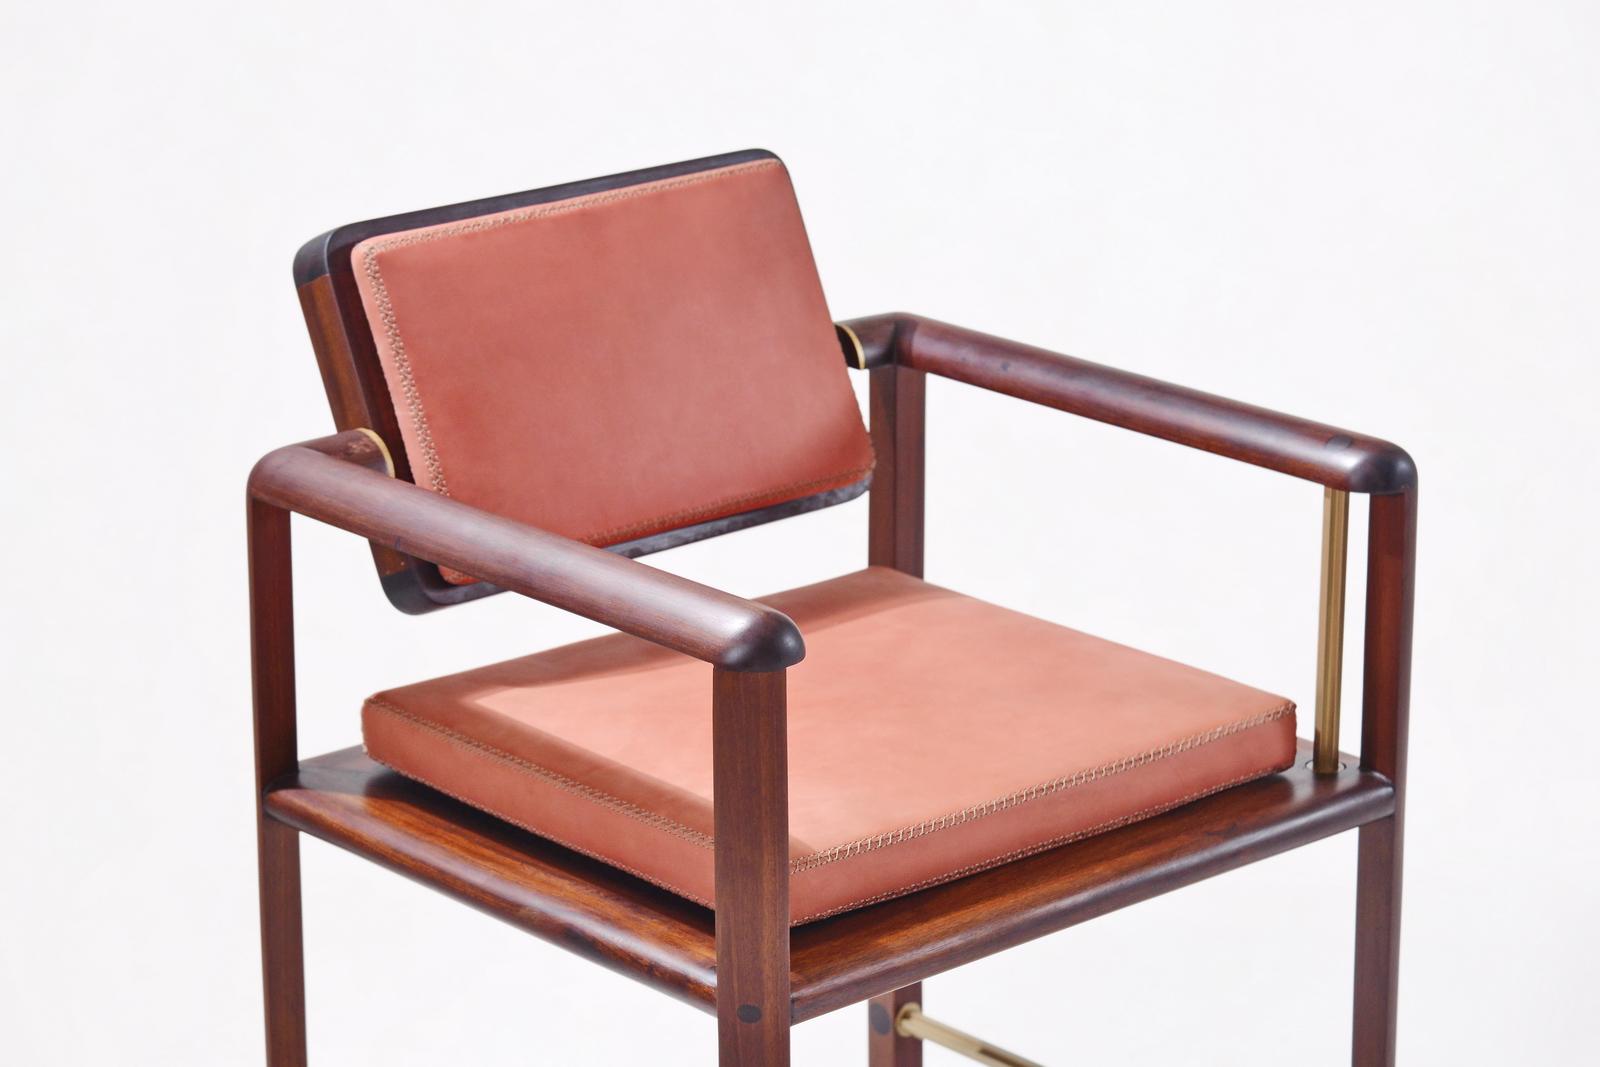 Bespoke Chair Reclaimed Hardwood Handstitched Leather Seating, P. Tendercool For Sale 2